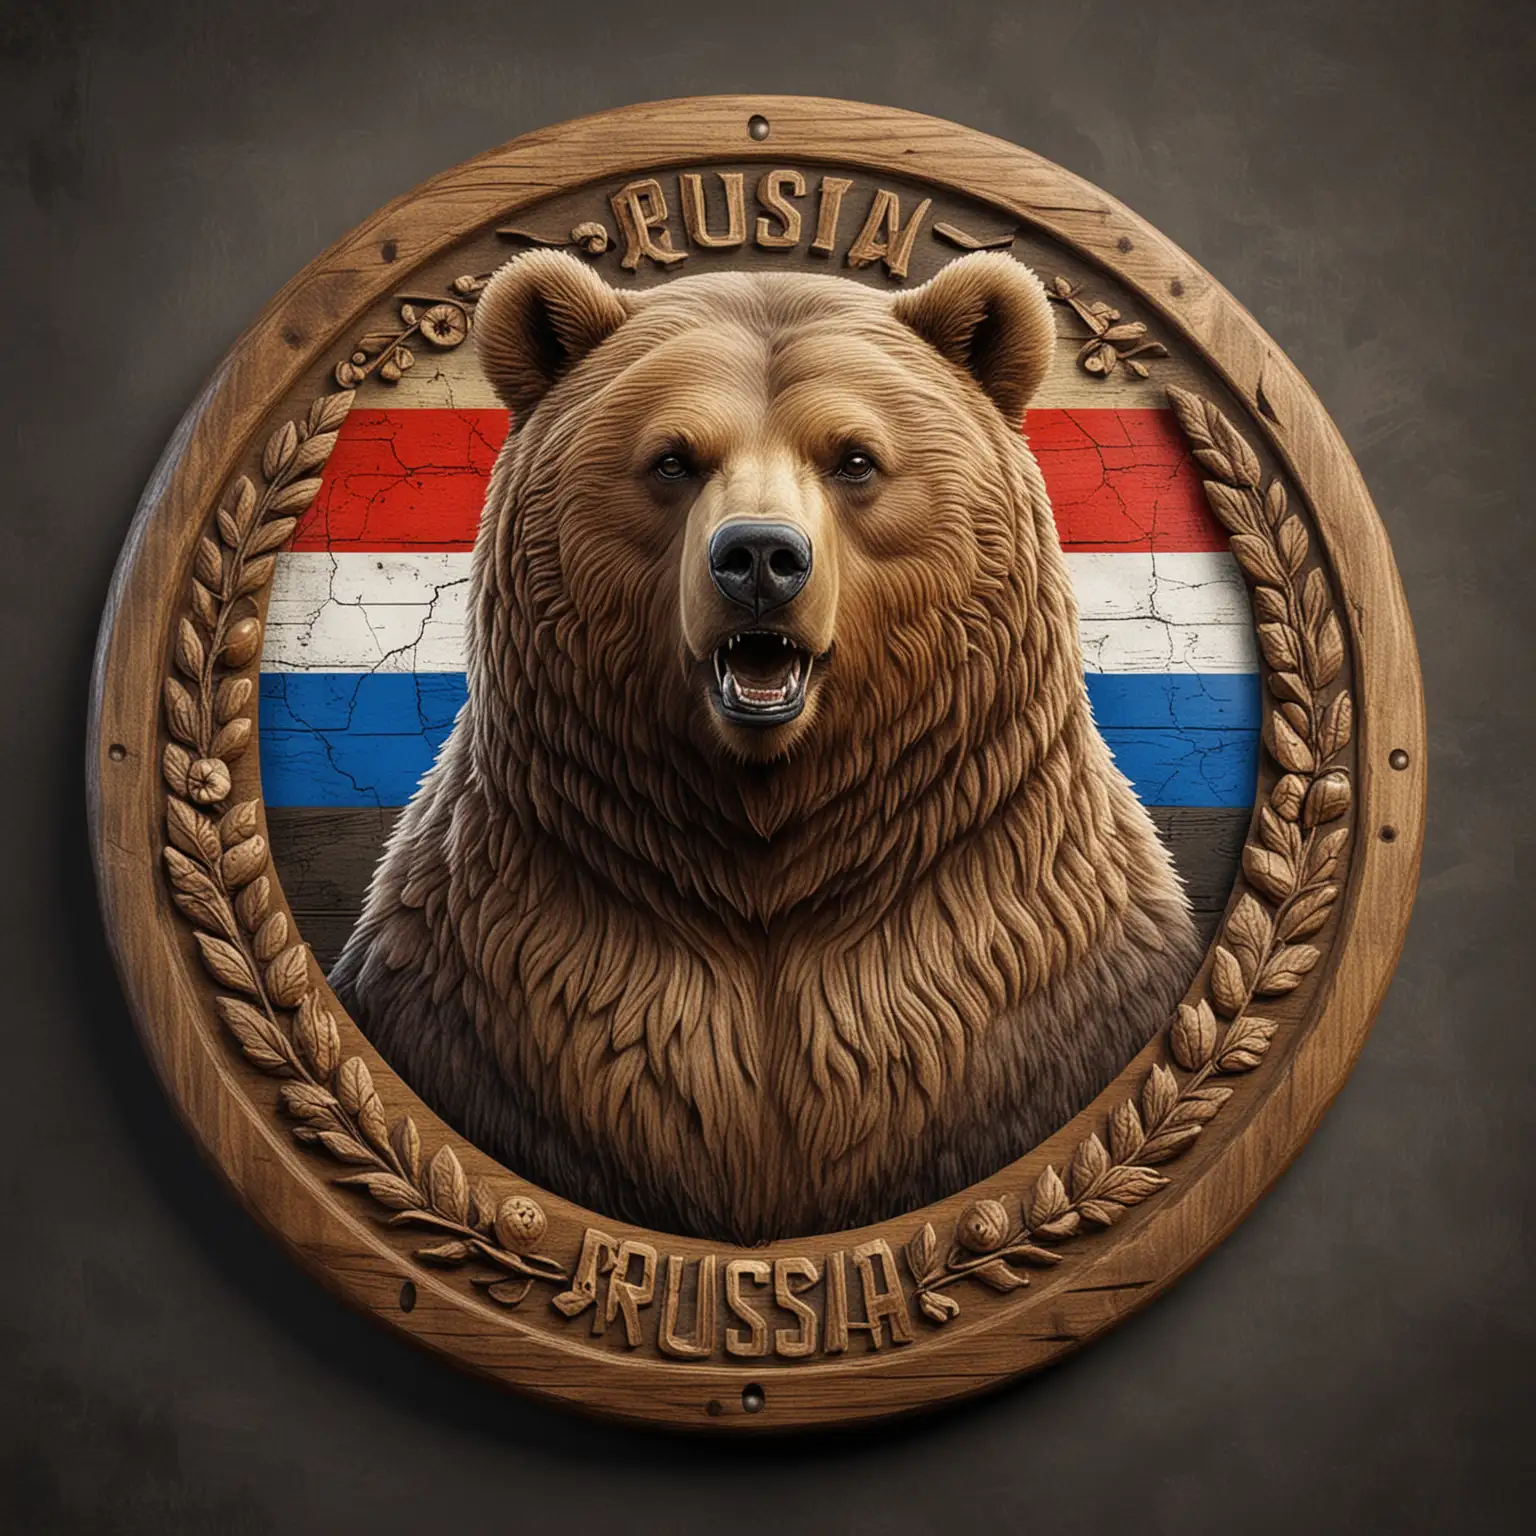 Majestic Russian Bear A Symbolic Portrait of Strength and Power